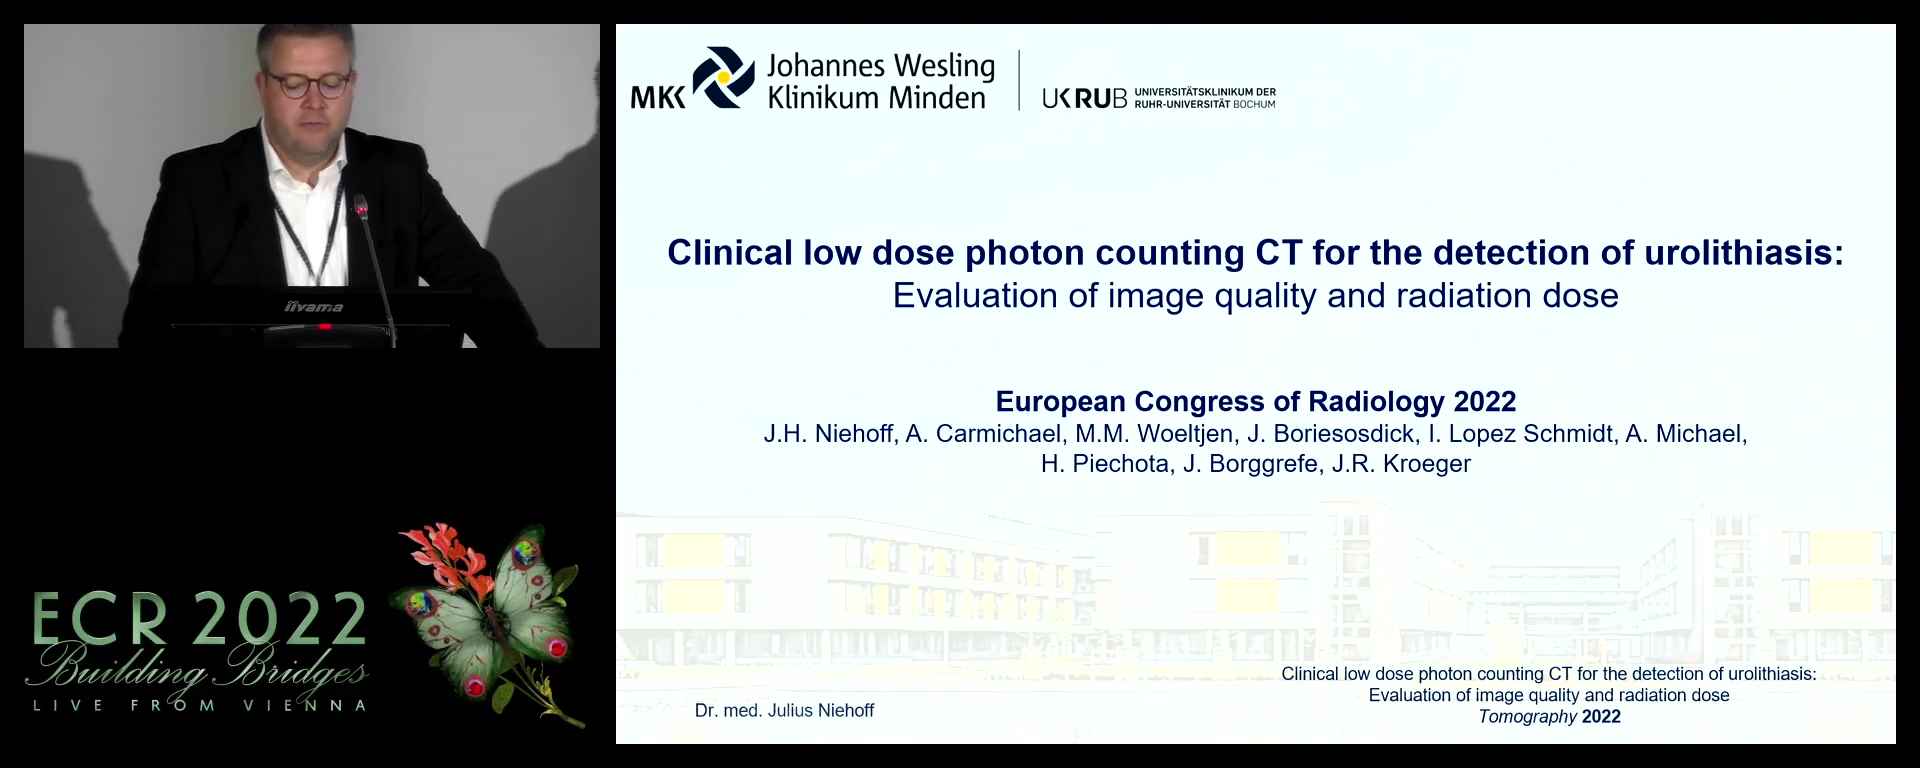 Clinical low dose photon counting CT for the detection of urolithiasis: evaluation of image quality and radiation dose